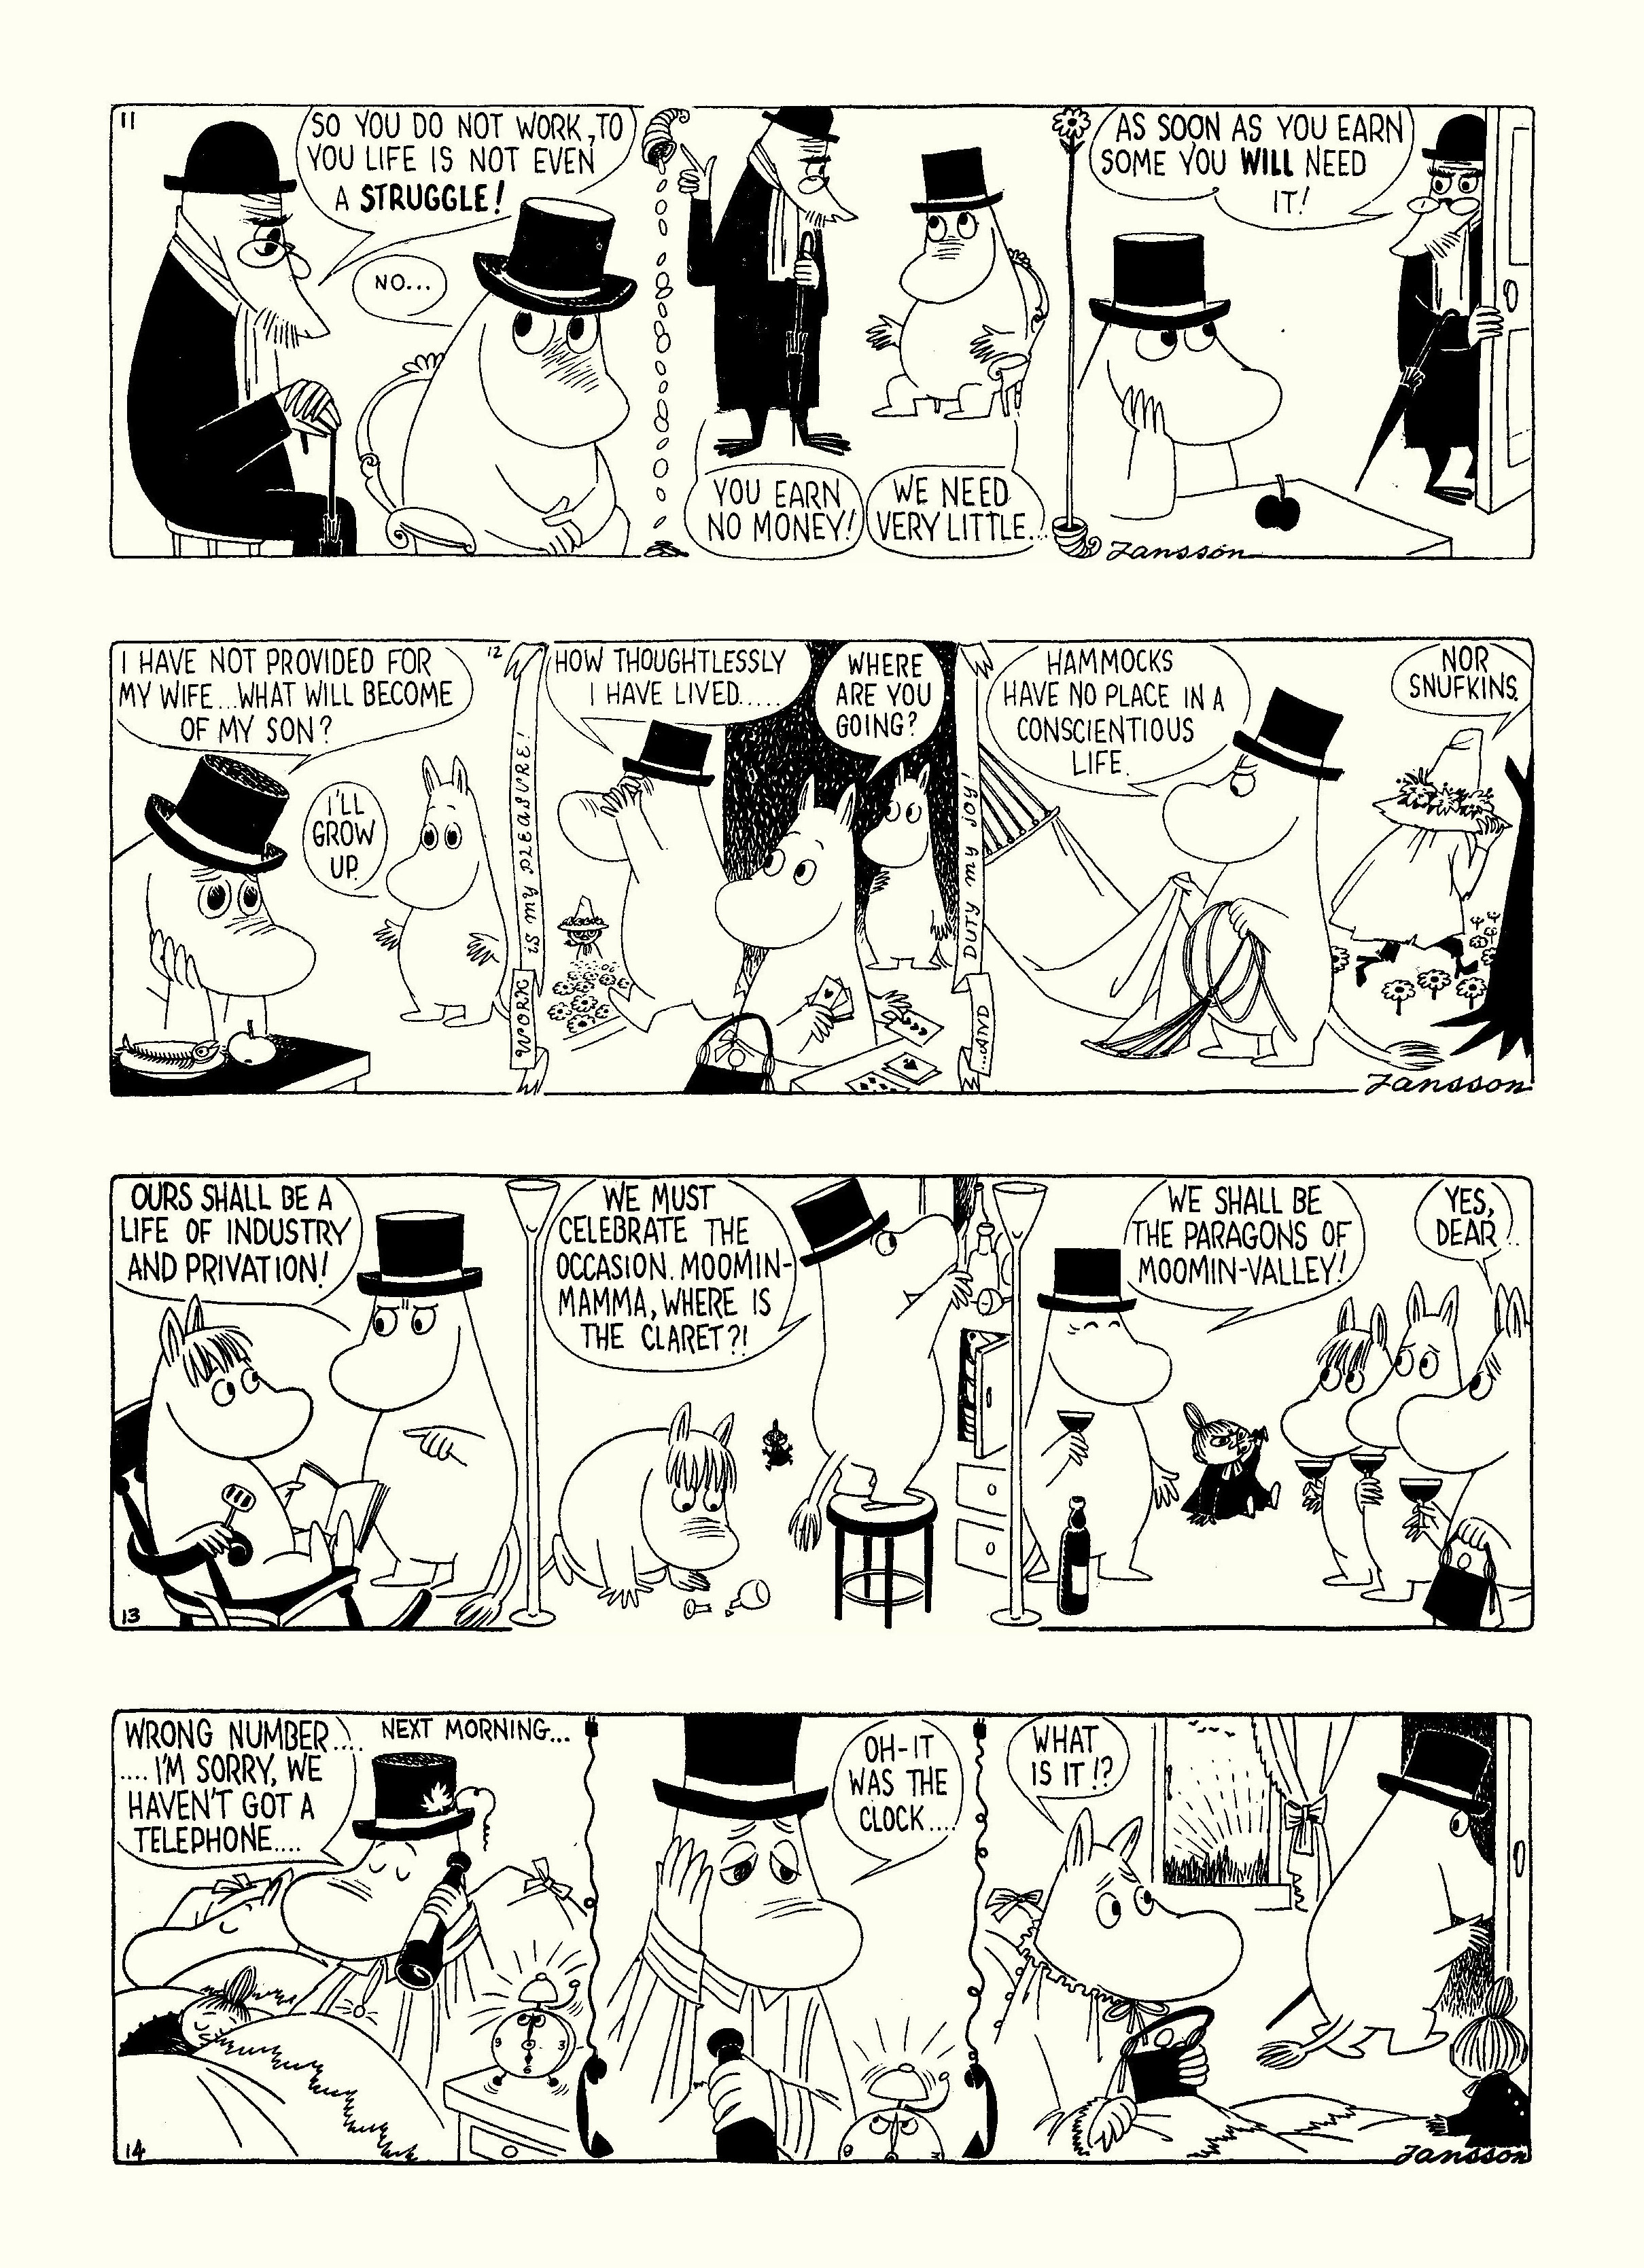 Read online Moomin: The Complete Tove Jansson Comic Strip comic -  Issue # TPB 4 - 40